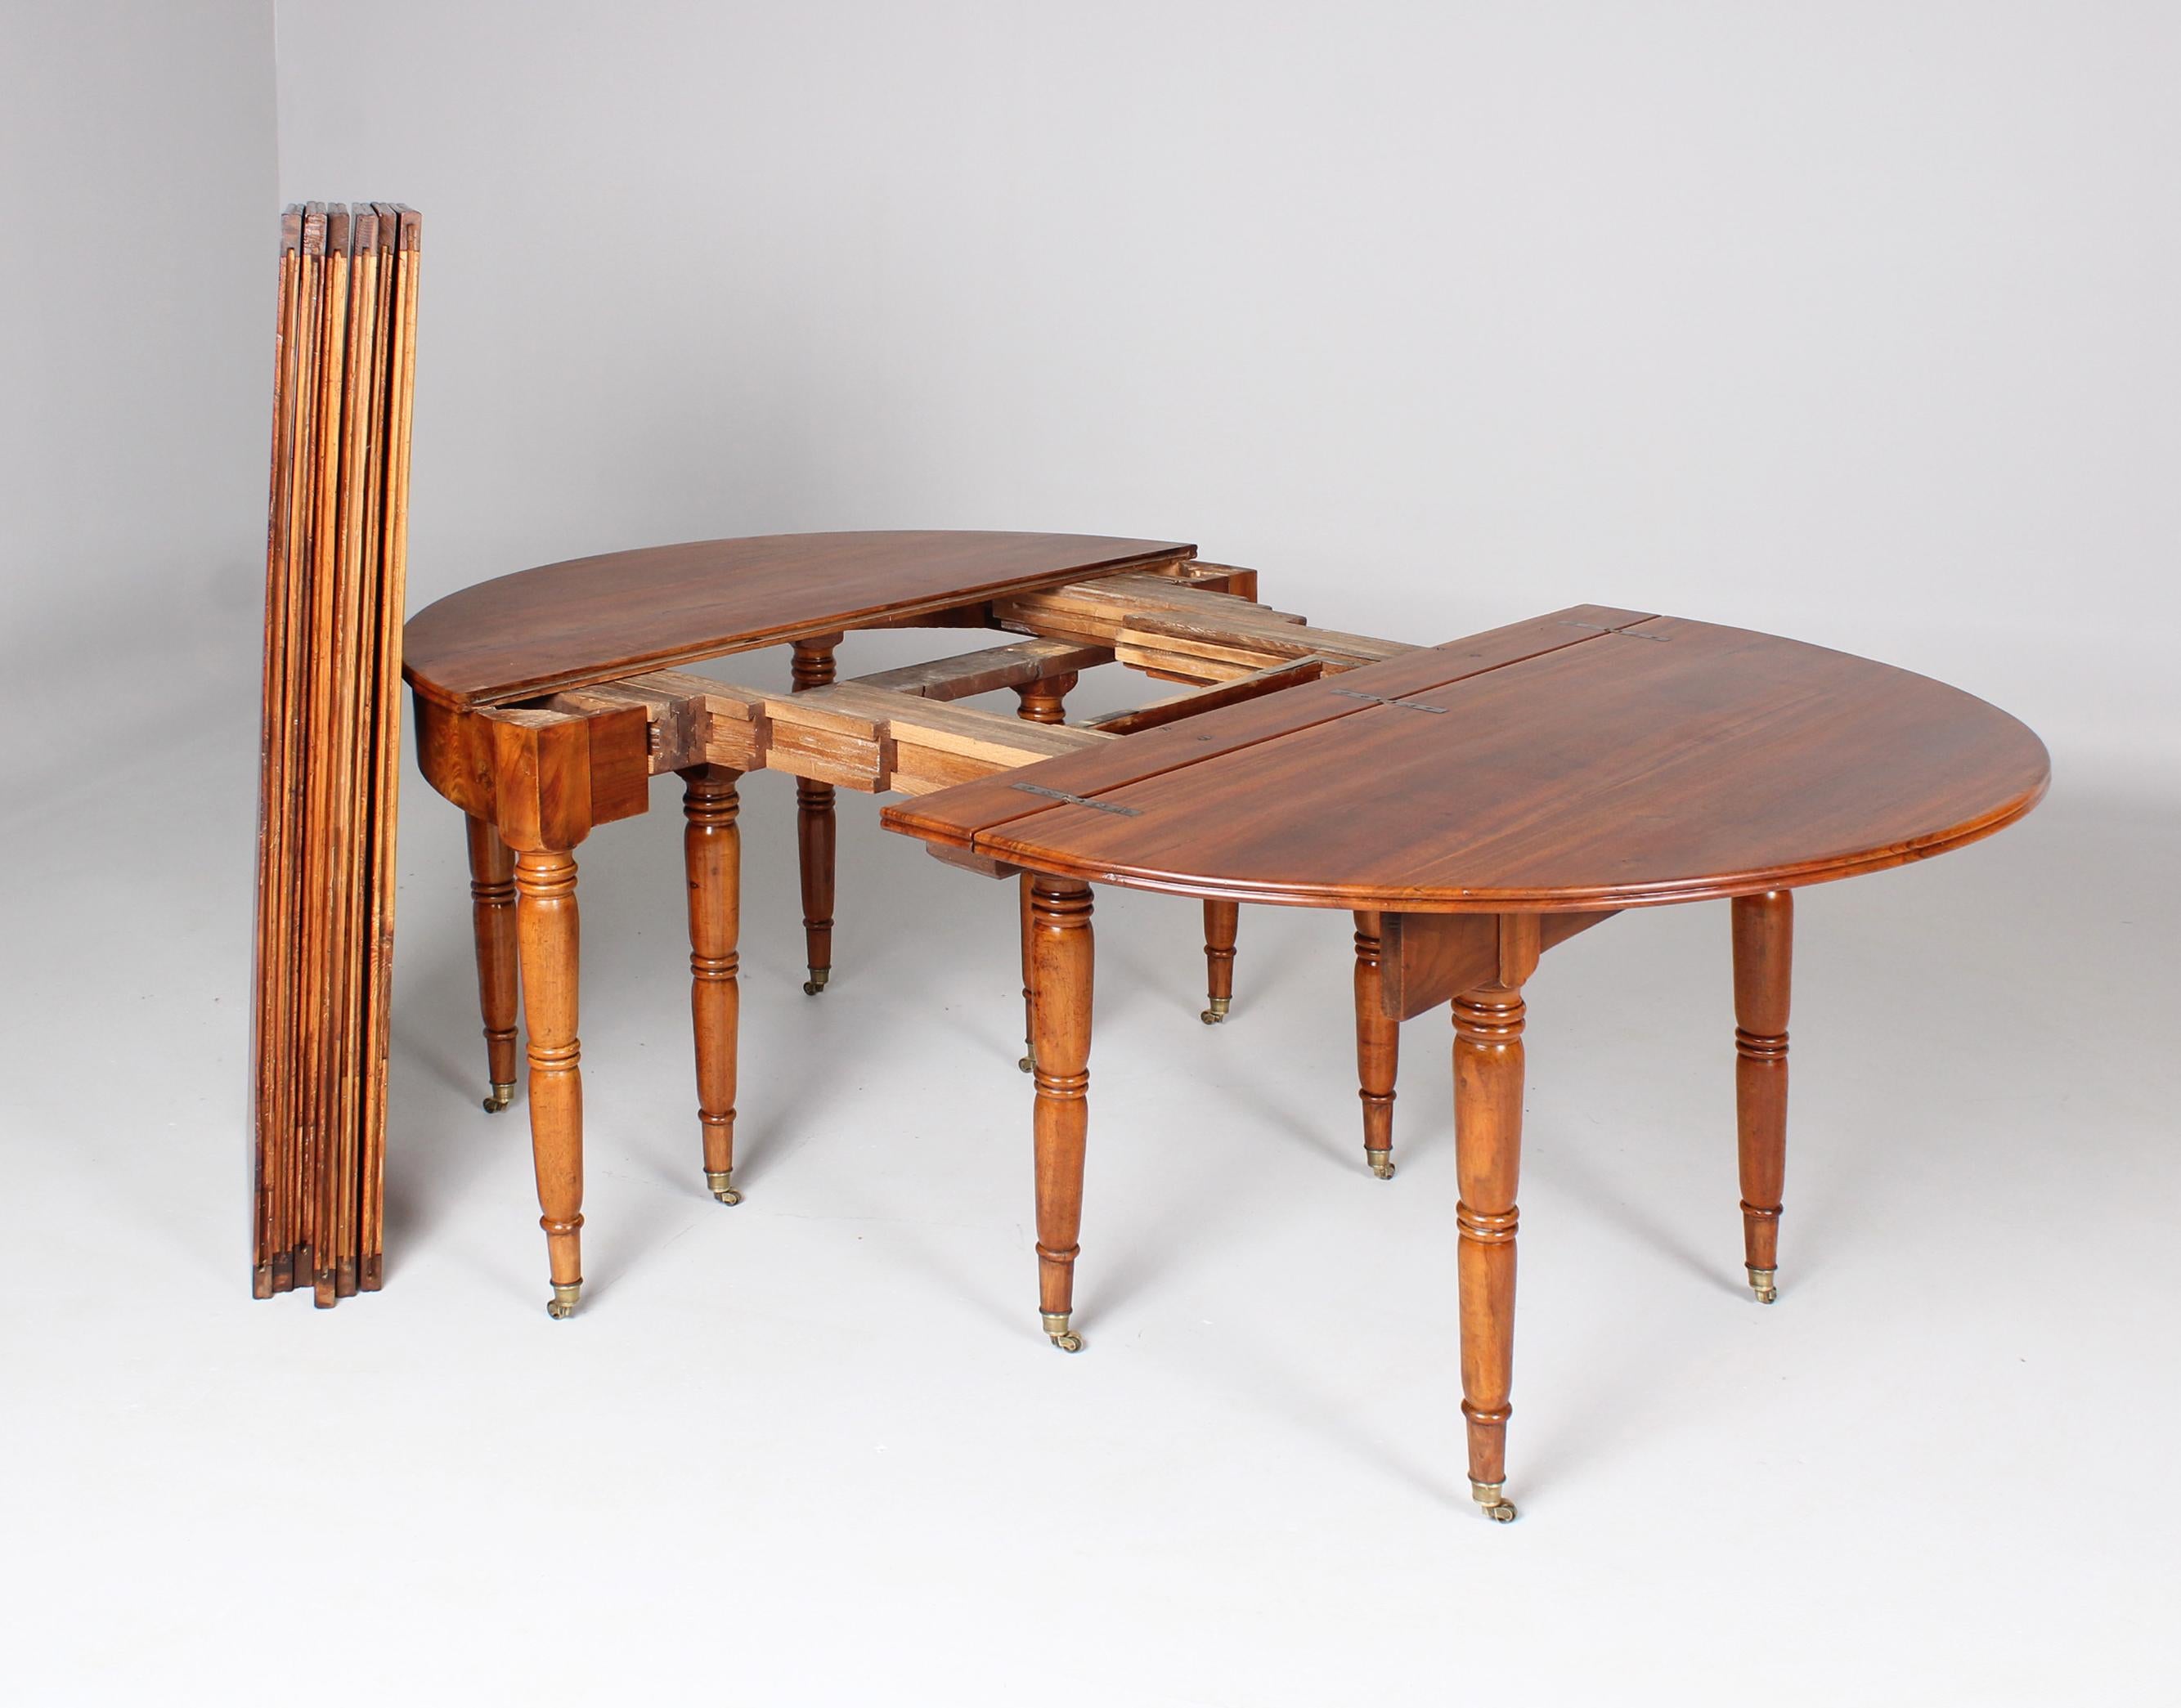 Large 19th Century Dining Table, Walnut, 12-16 People 2